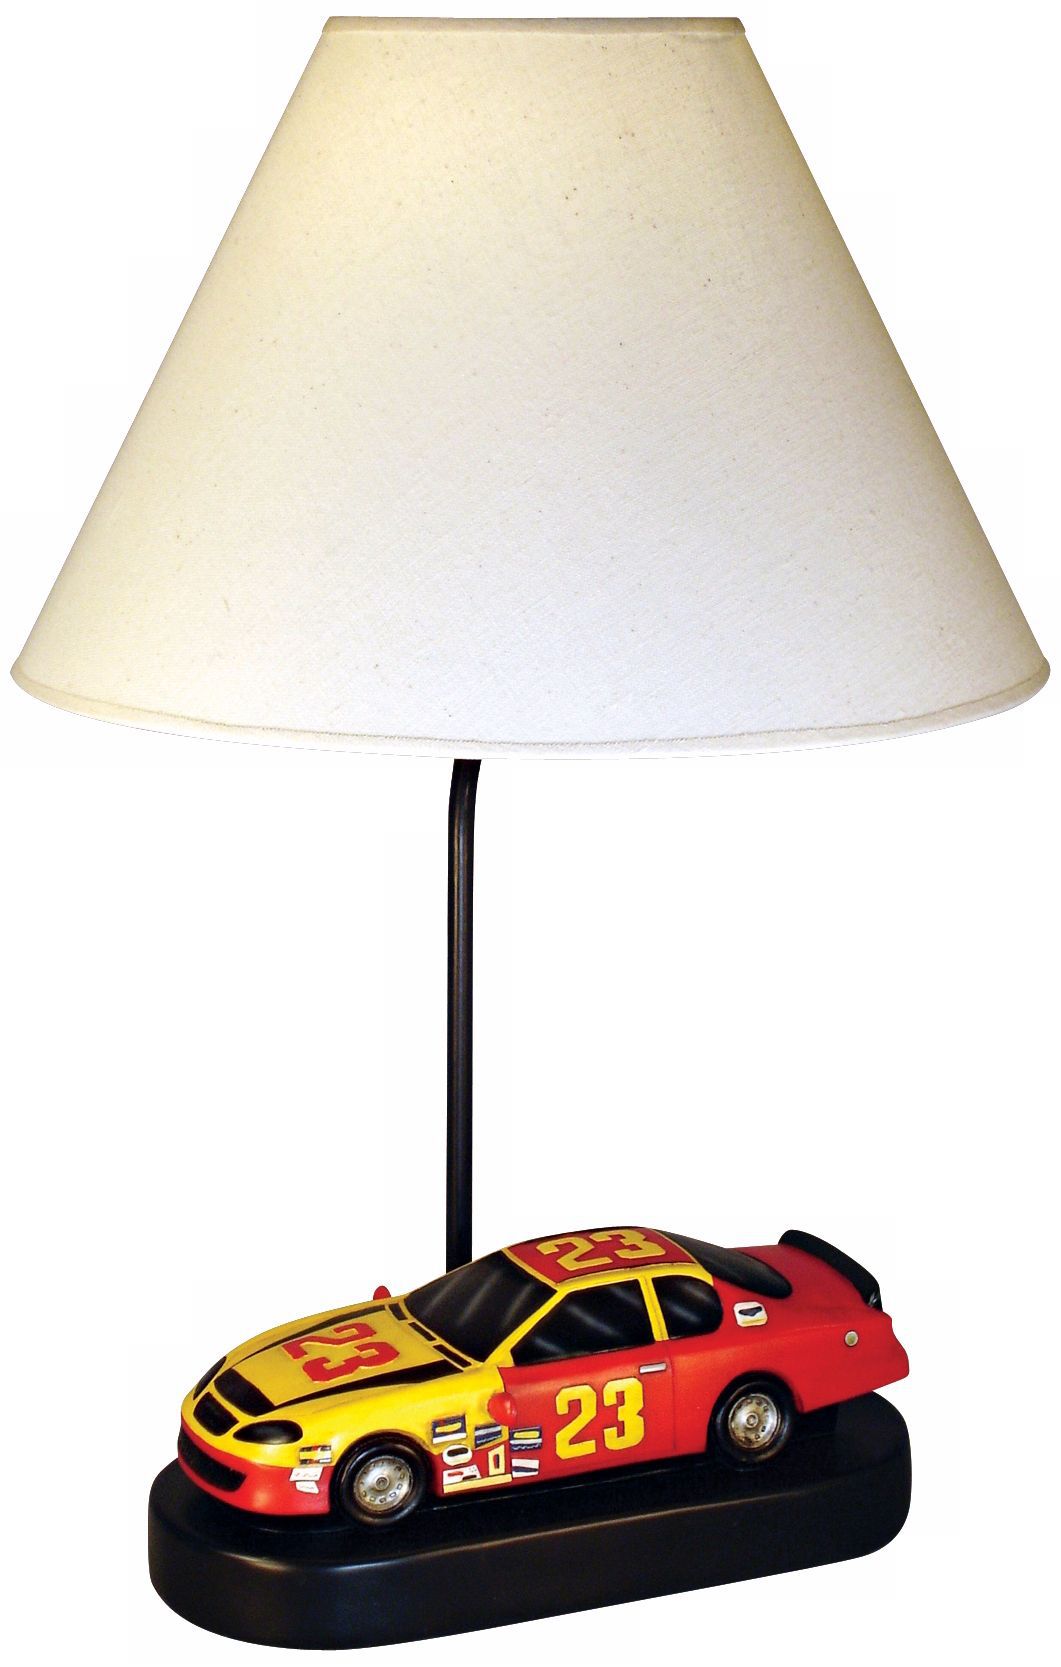 race car high accent table lamp lamps plus tall lap desk target ashley stewart furniture small glass and chairs dining behind couch large umbrella stand mirrored tables pork pie